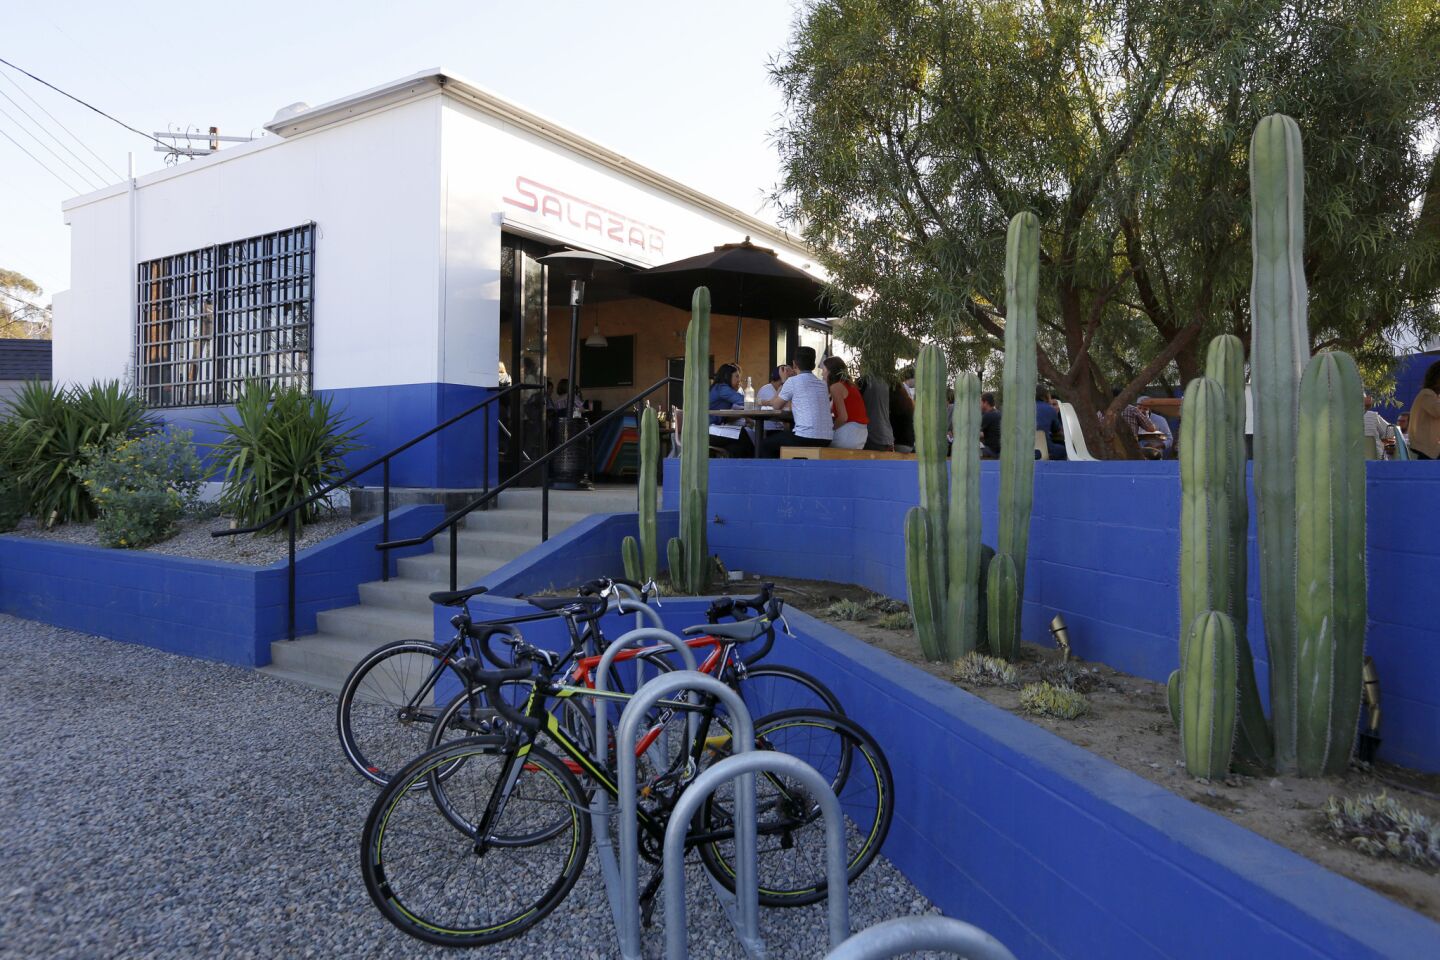 Salazar restaurant is located in the L.A. River adjacent community known as Frogtown.